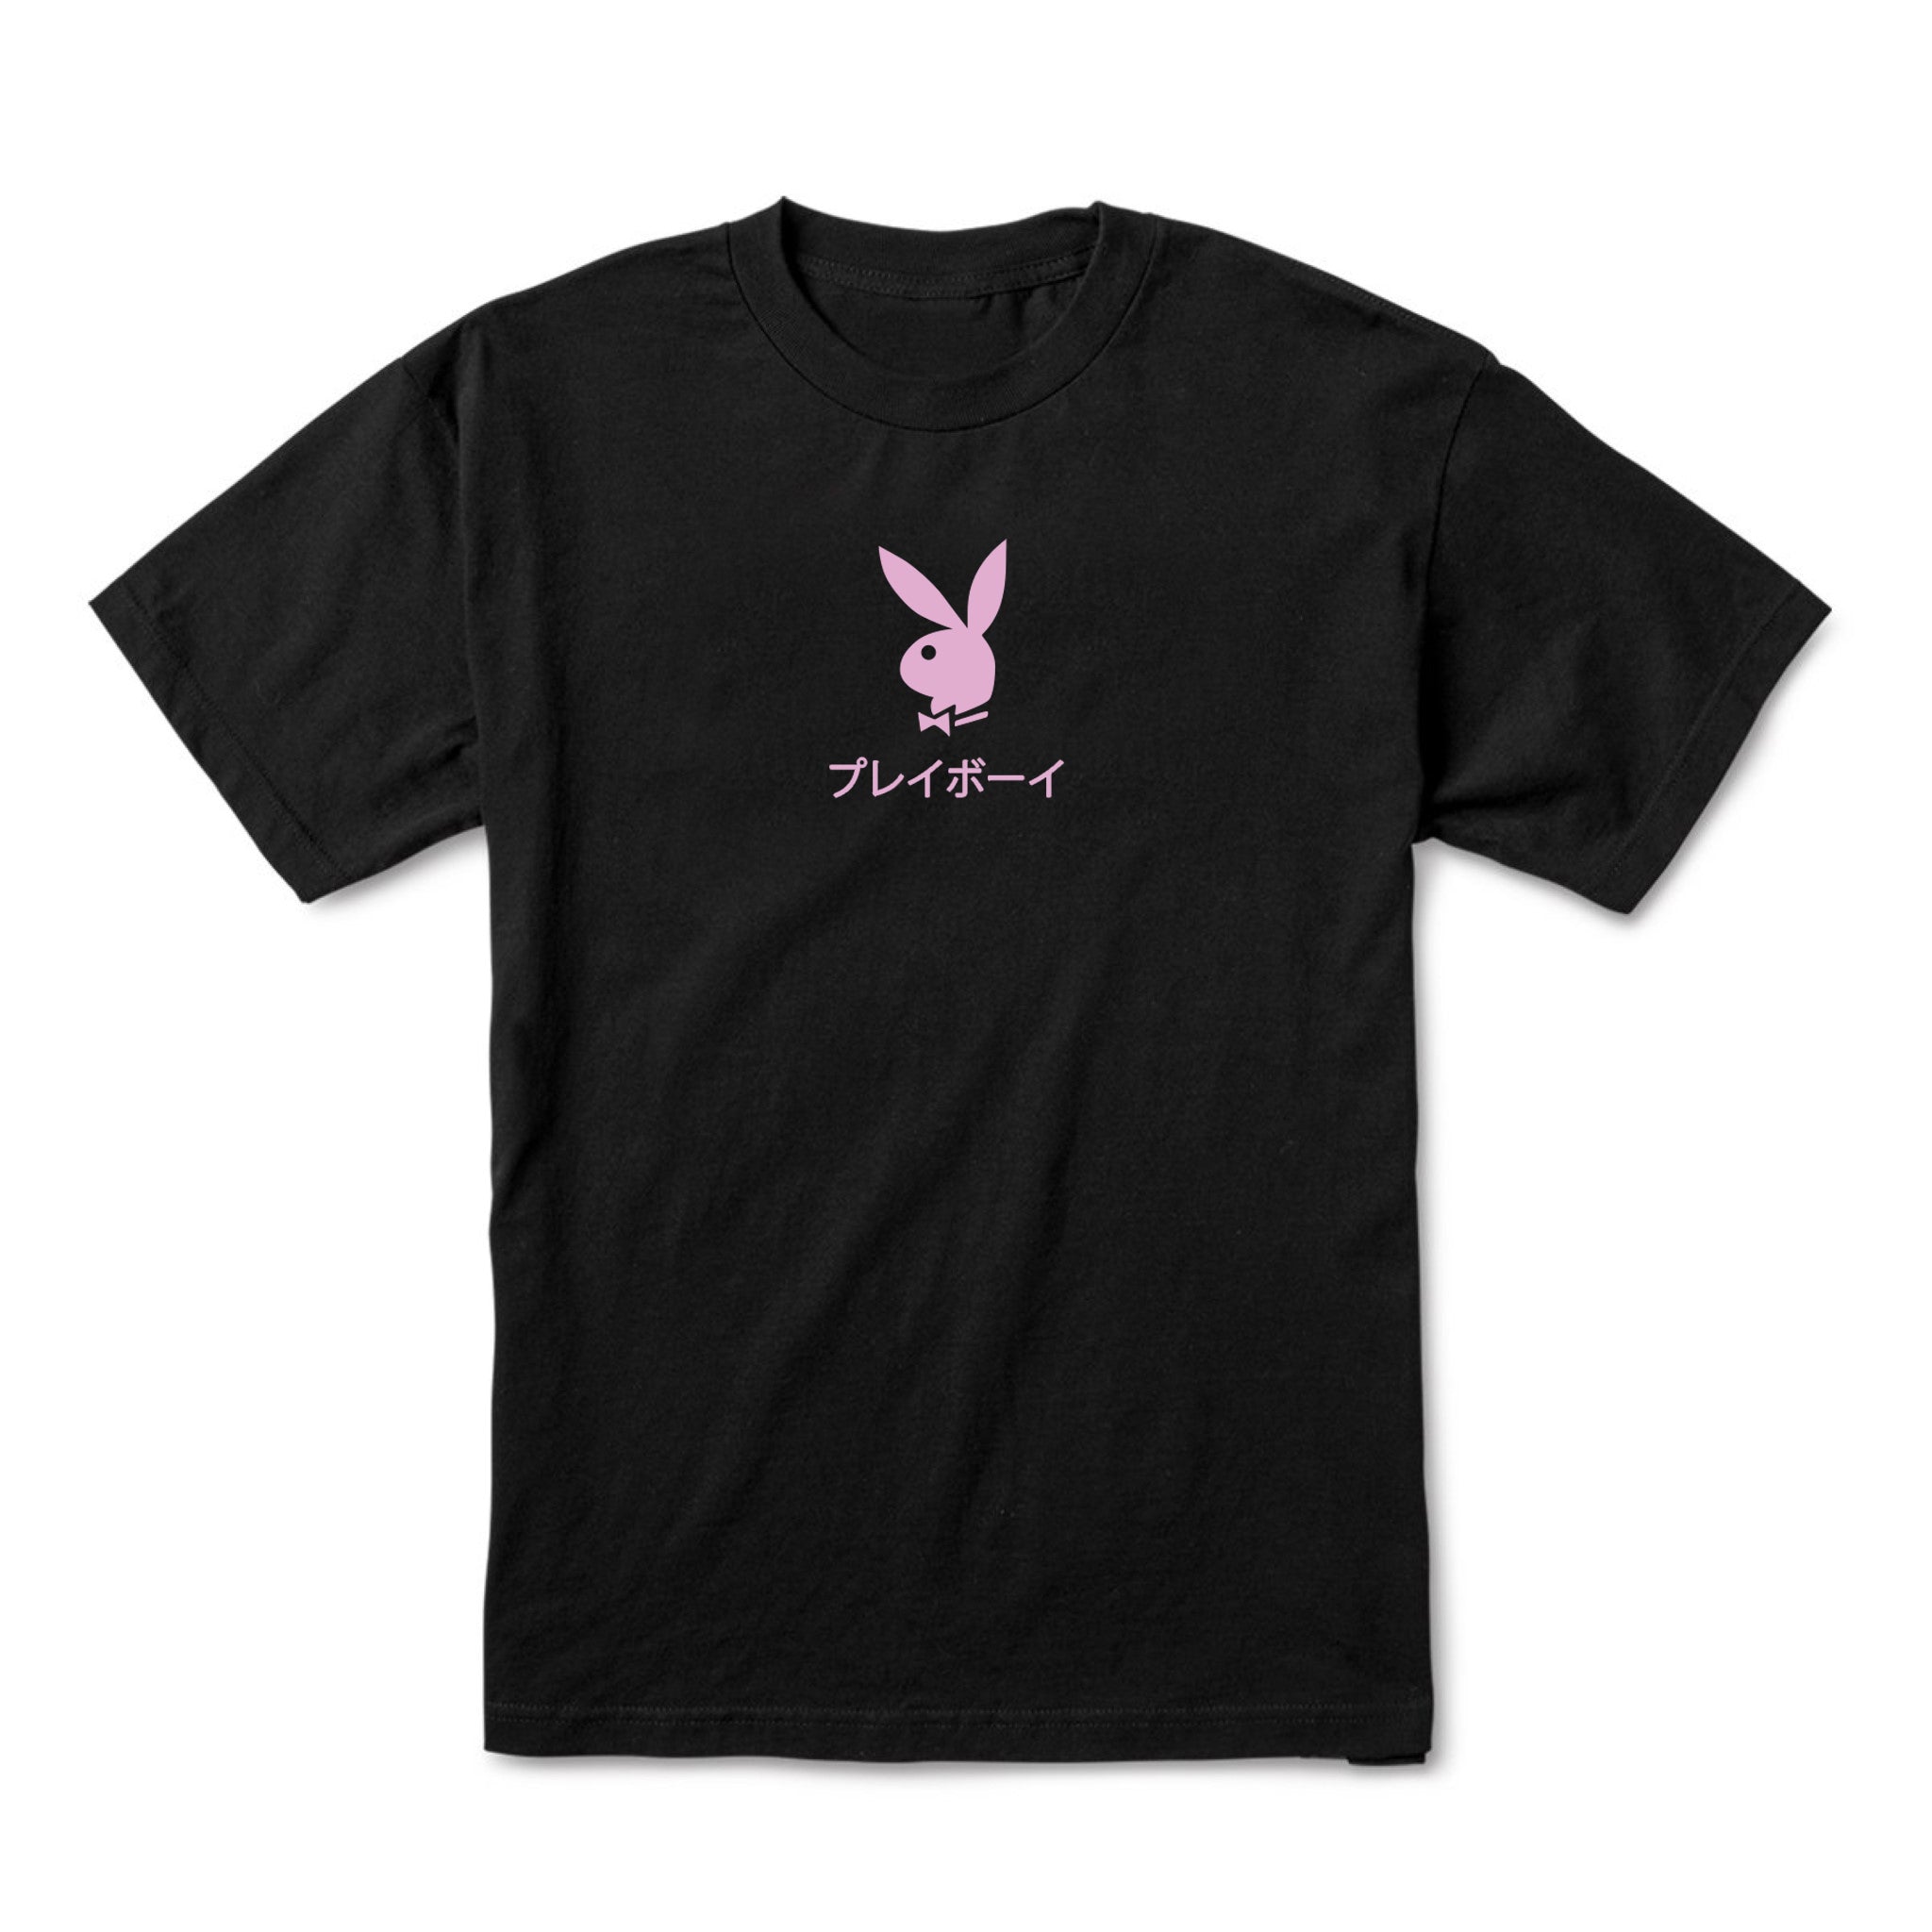 The Playboy T-Shirt: Official Playboy T-Shirts | Playboy.com – Page 9